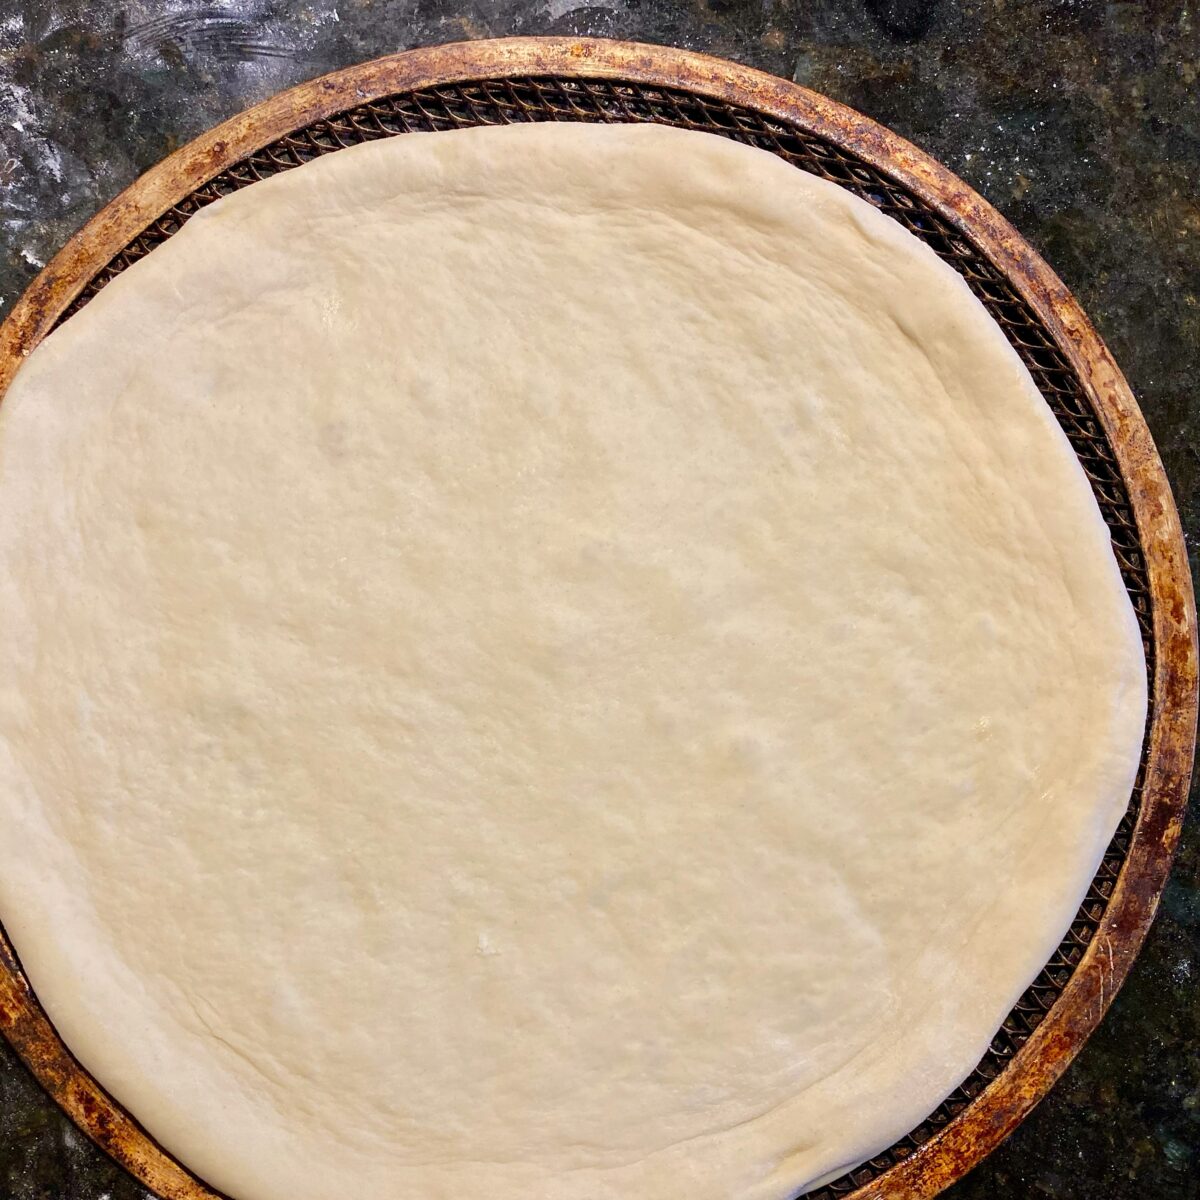 top view of stretched pizza dough on an aluminum pizza screen.